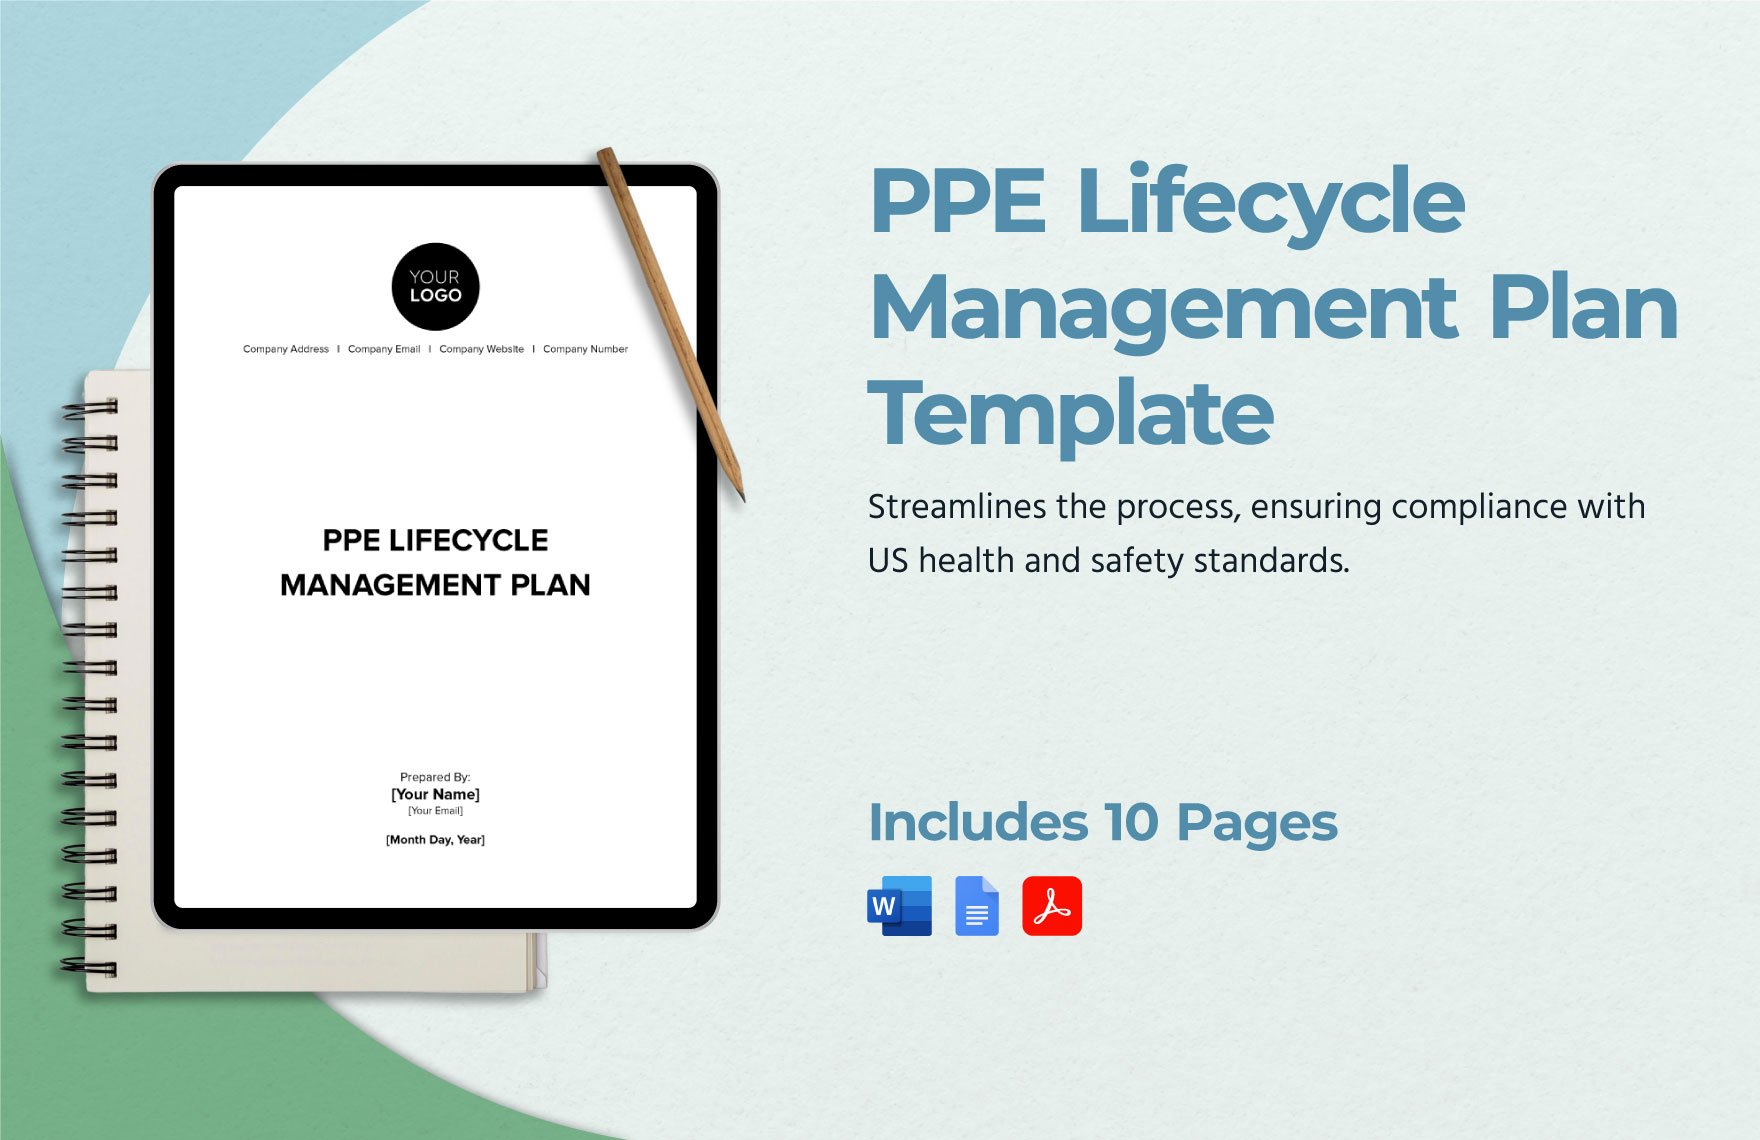 PPE Lifecycle Management Plan Template